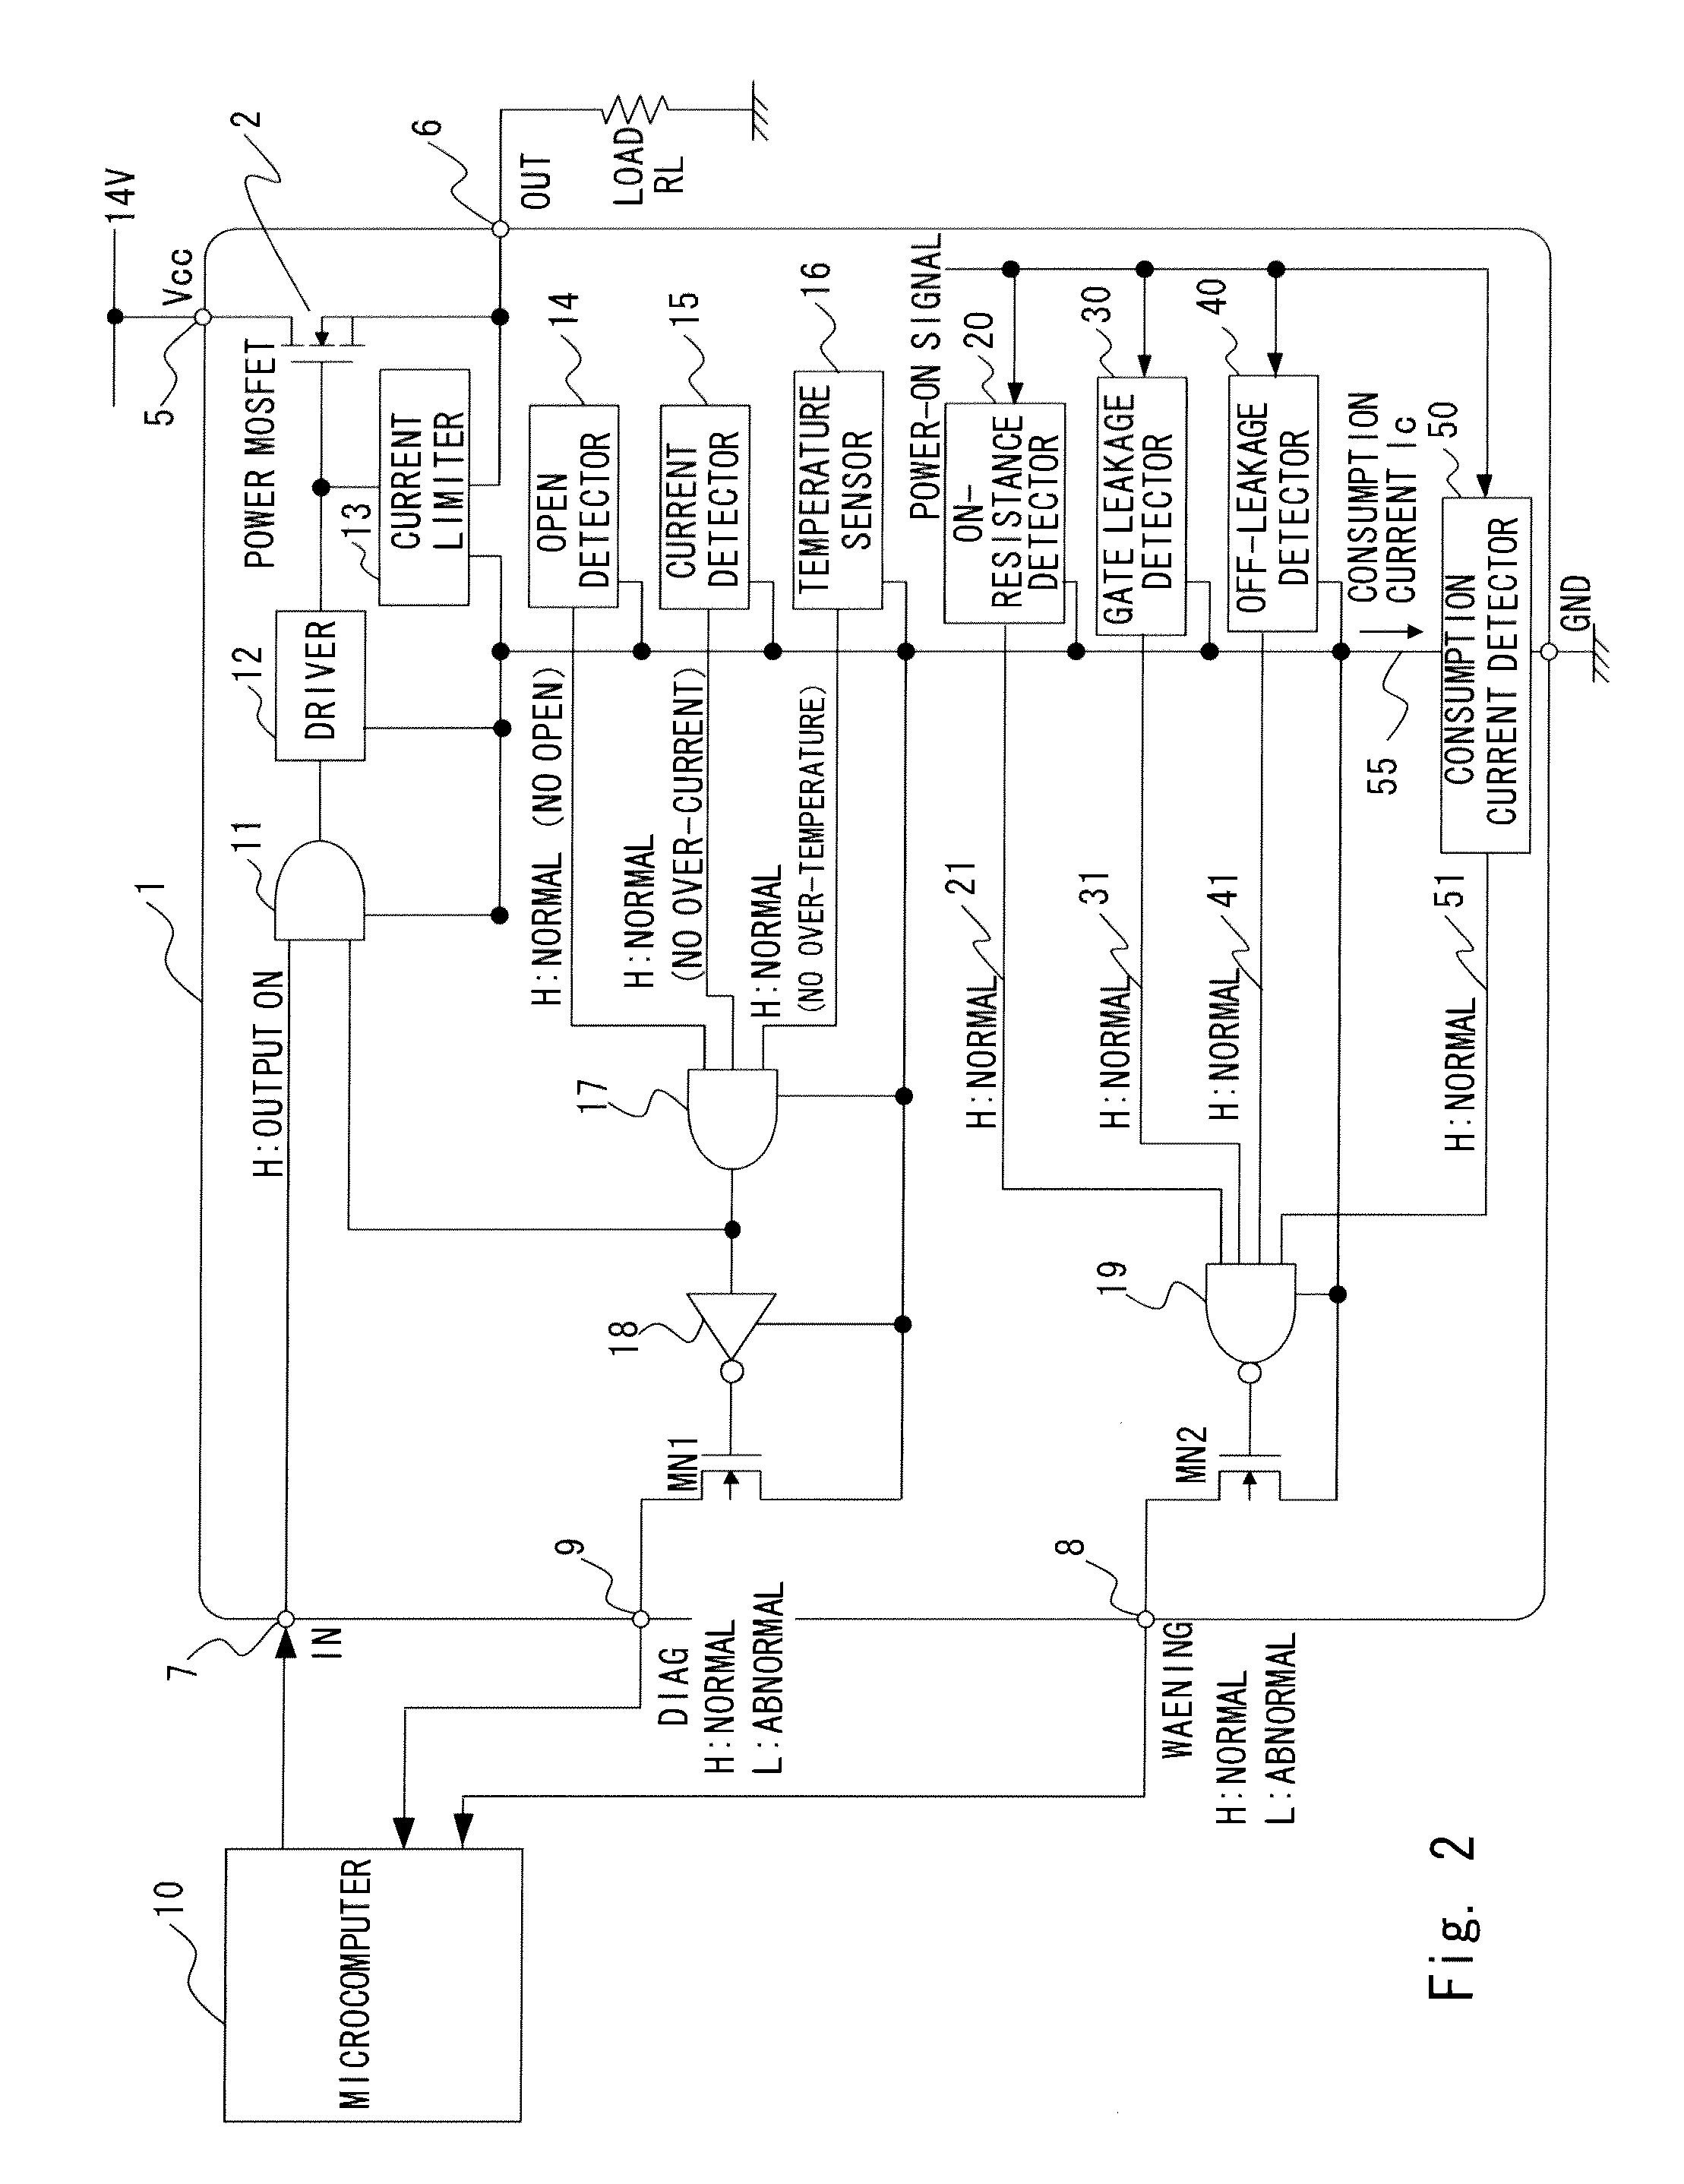 Semiconductor apparatus and method of detecting characteristic degradation of semiconductor apparatus